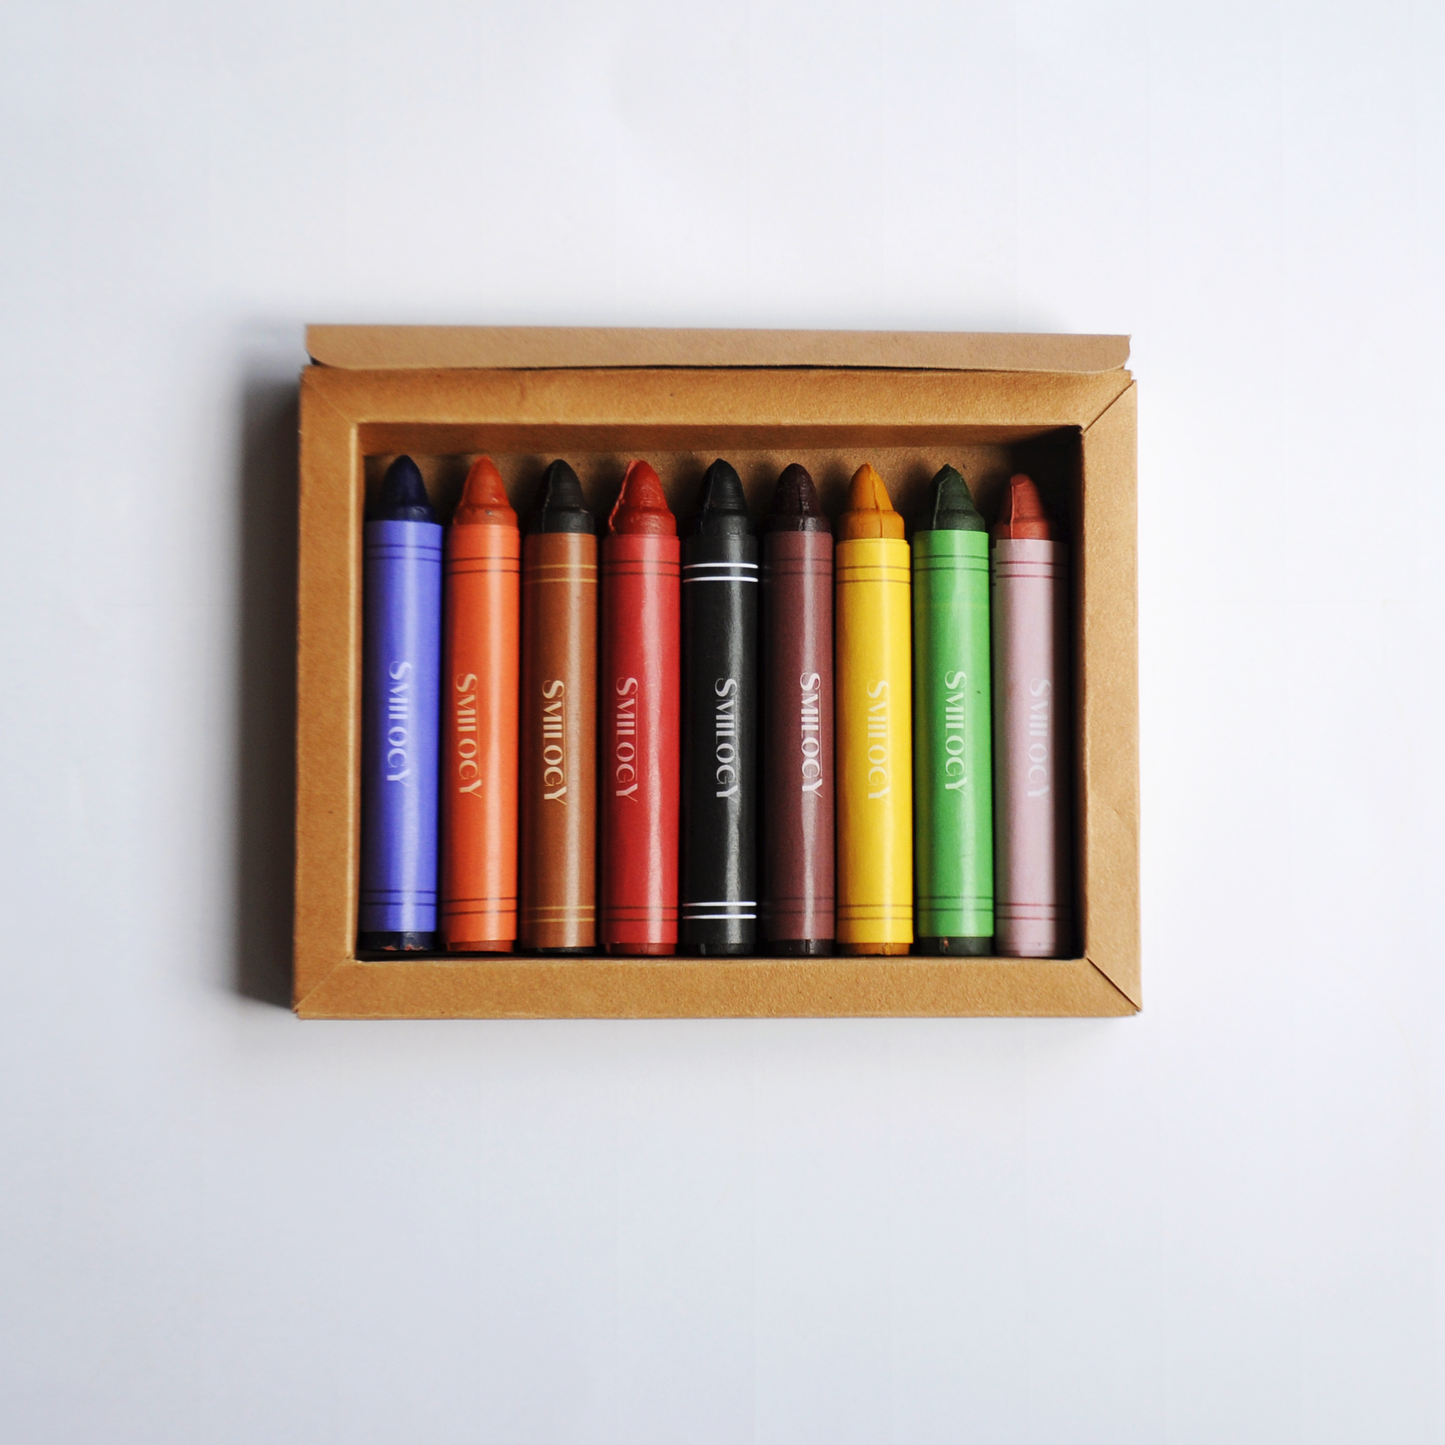 Standard Beeswax Crayon Set of 9 All Natural photo of open box of crayons